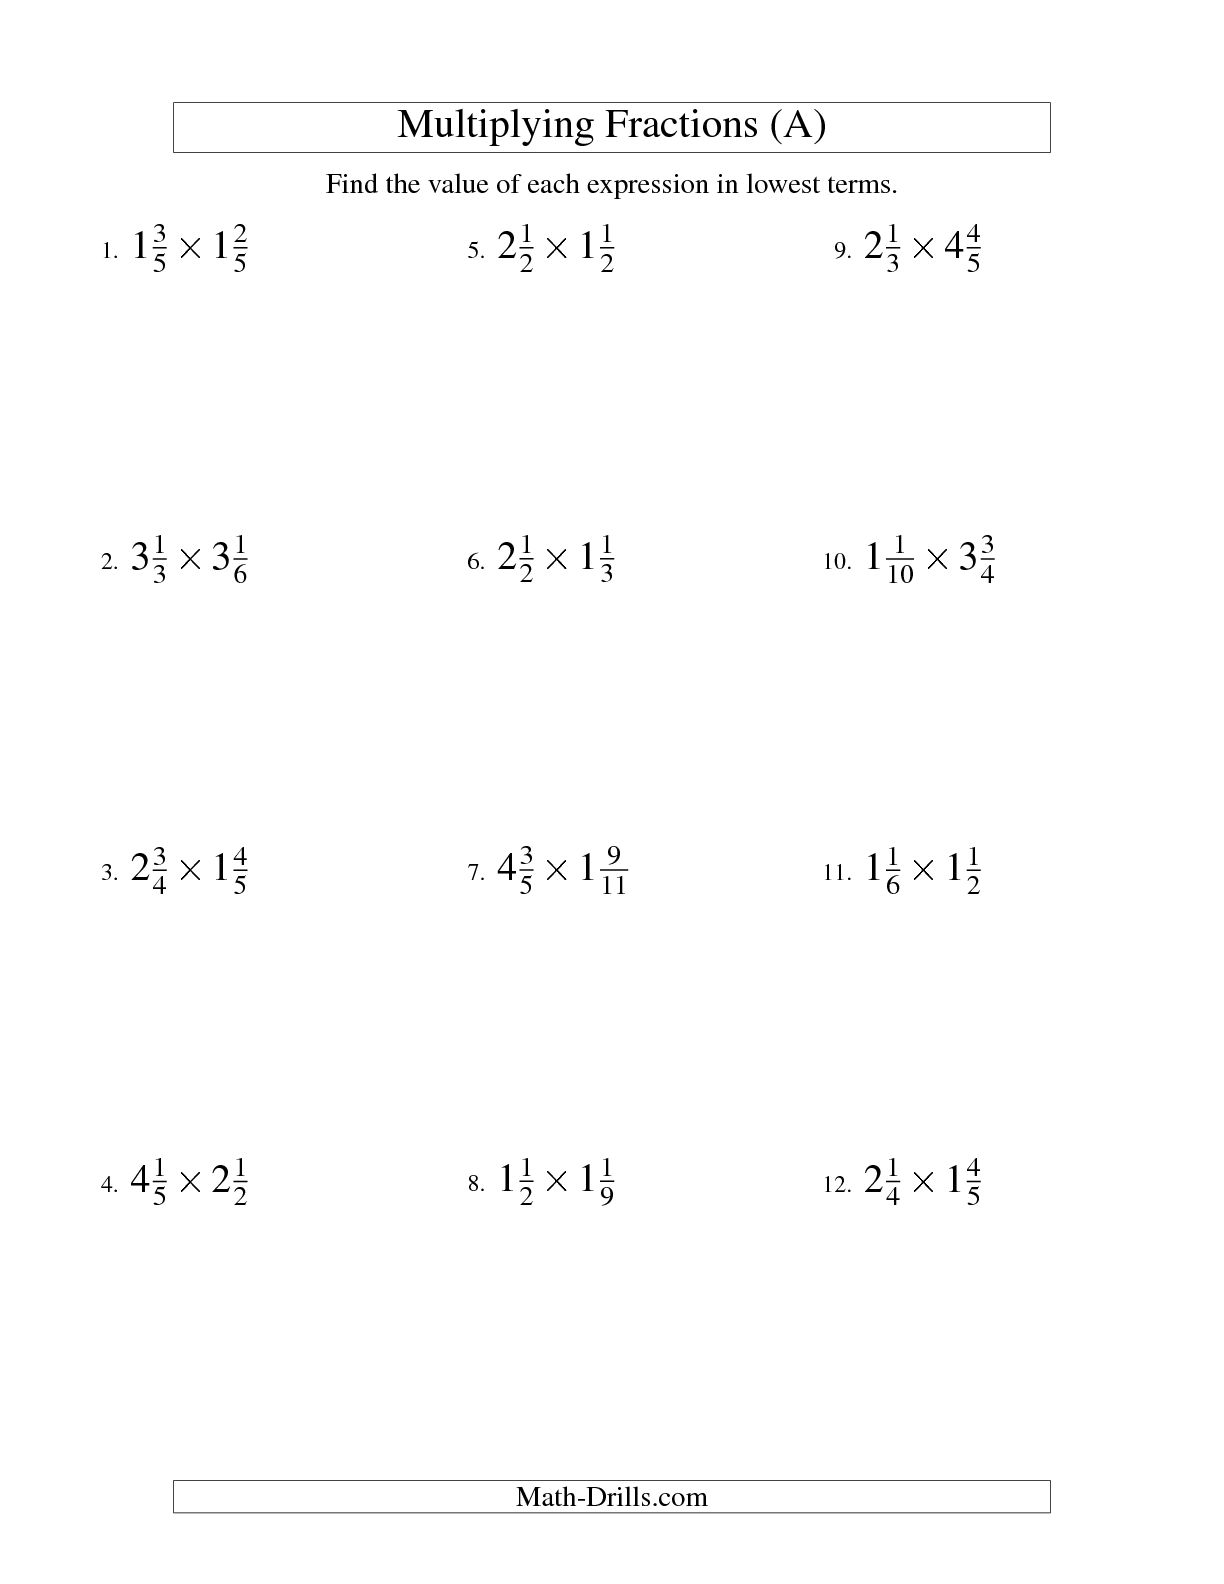 Mixed Fraction Multiplication Worksheets